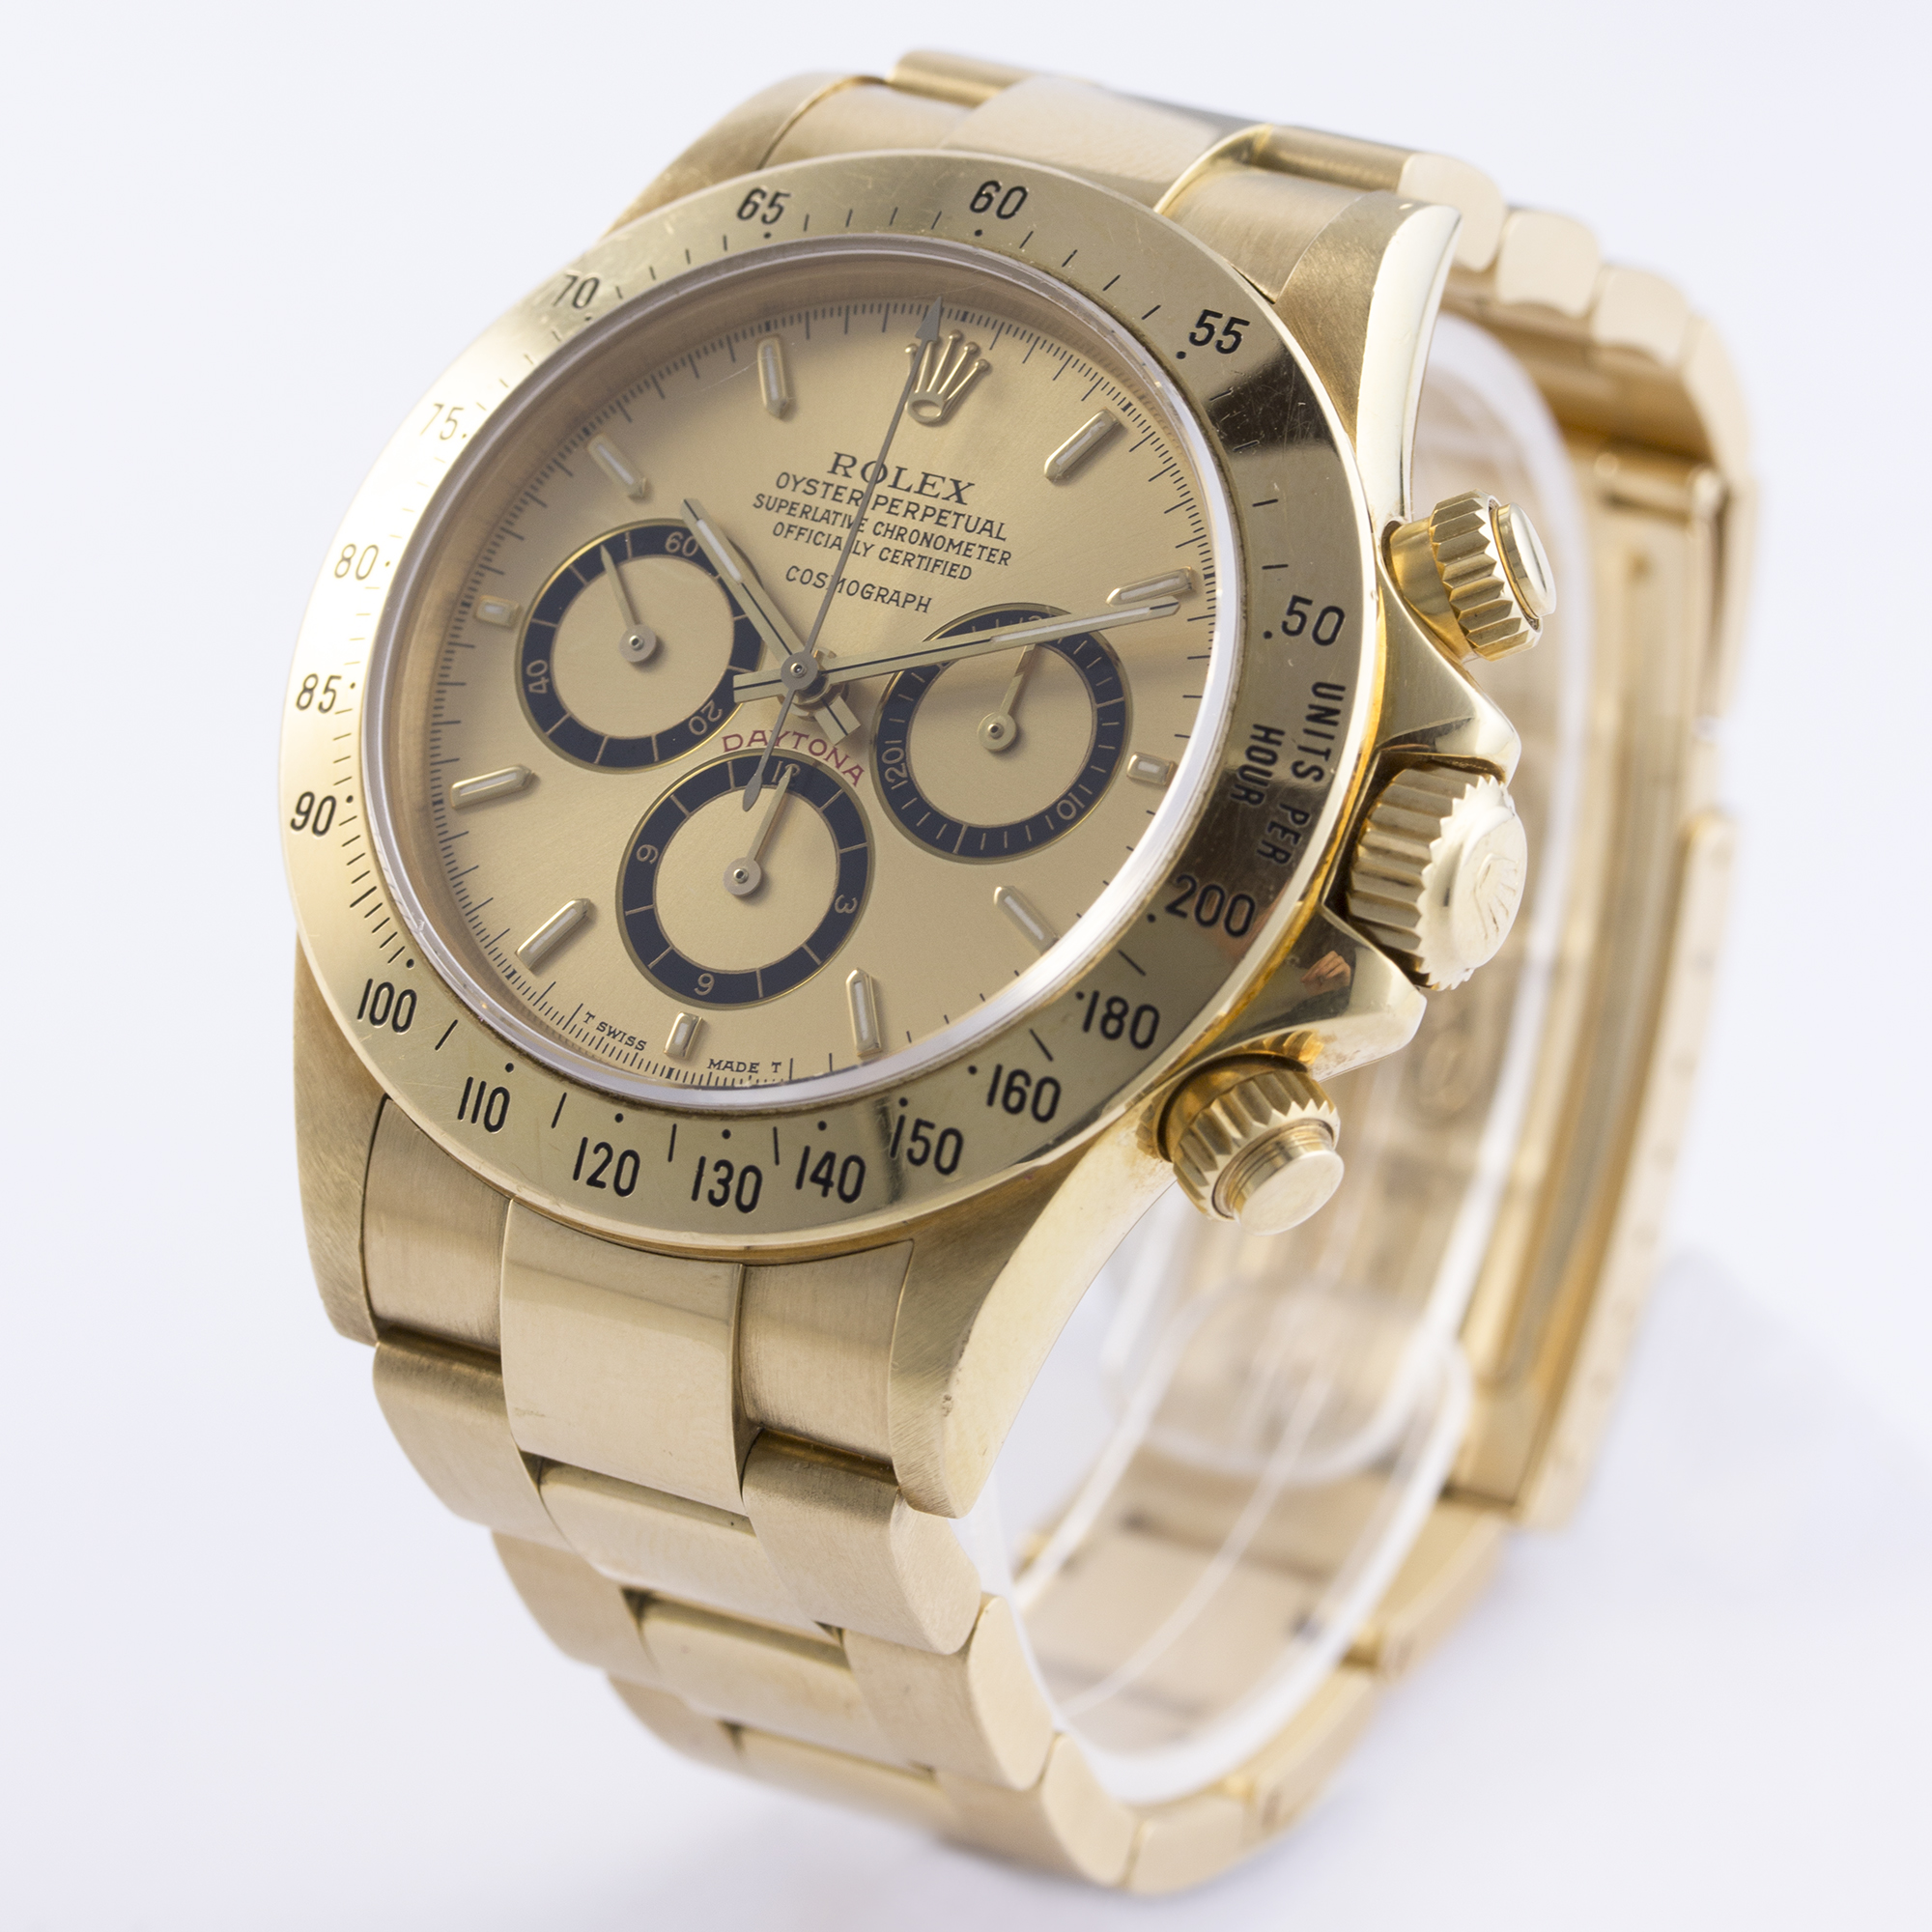 A FINE & RARE GENTLEMAN'S 18K SOLID GOLD ROLEX OYSTER PERPETUAL "FLOATING DIAL" COSMOGRAPH DAYTONA - Image 4 of 6